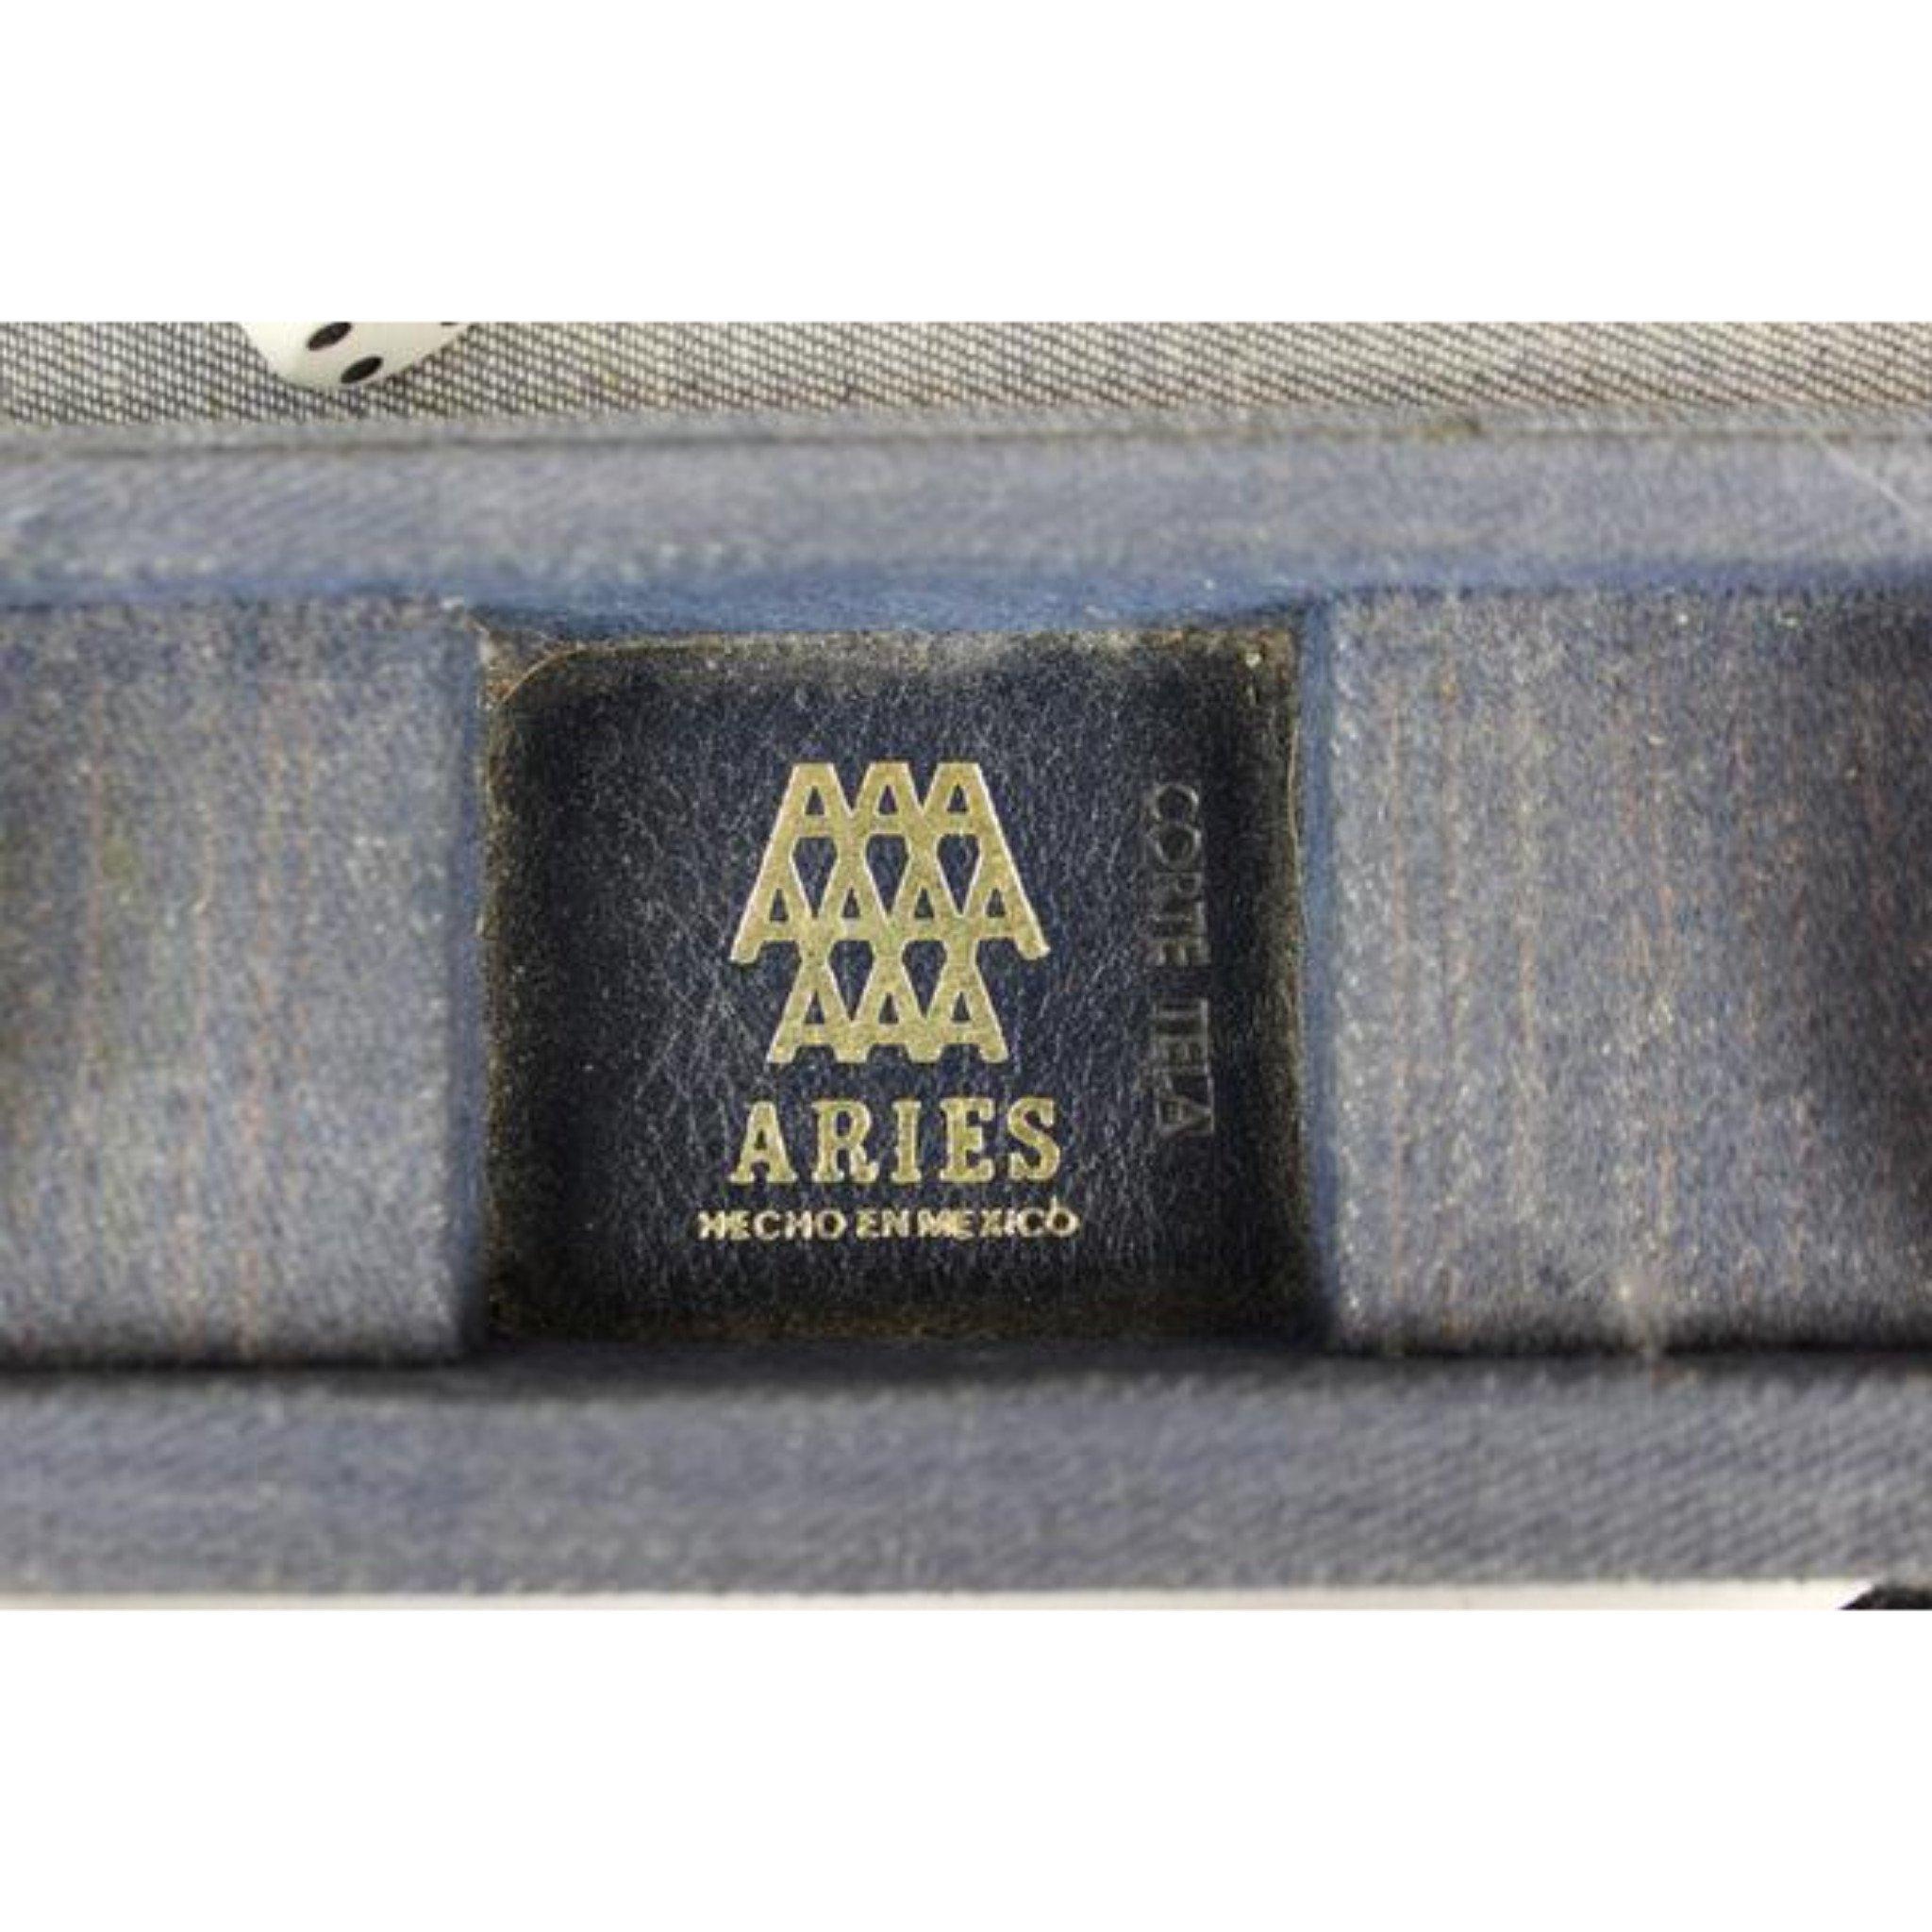 Fabulous denim backgammon case belonging to the Baron de Rede (1922-2004) that he played whilst on holiday in Acapulco, Mex.

Ex- w/ leather stamp Baron de Rosnay Backgammon's Hecho en Mexico

Provenance: Sotheby's Paris March 2005 Lot #907/-3

Sz: